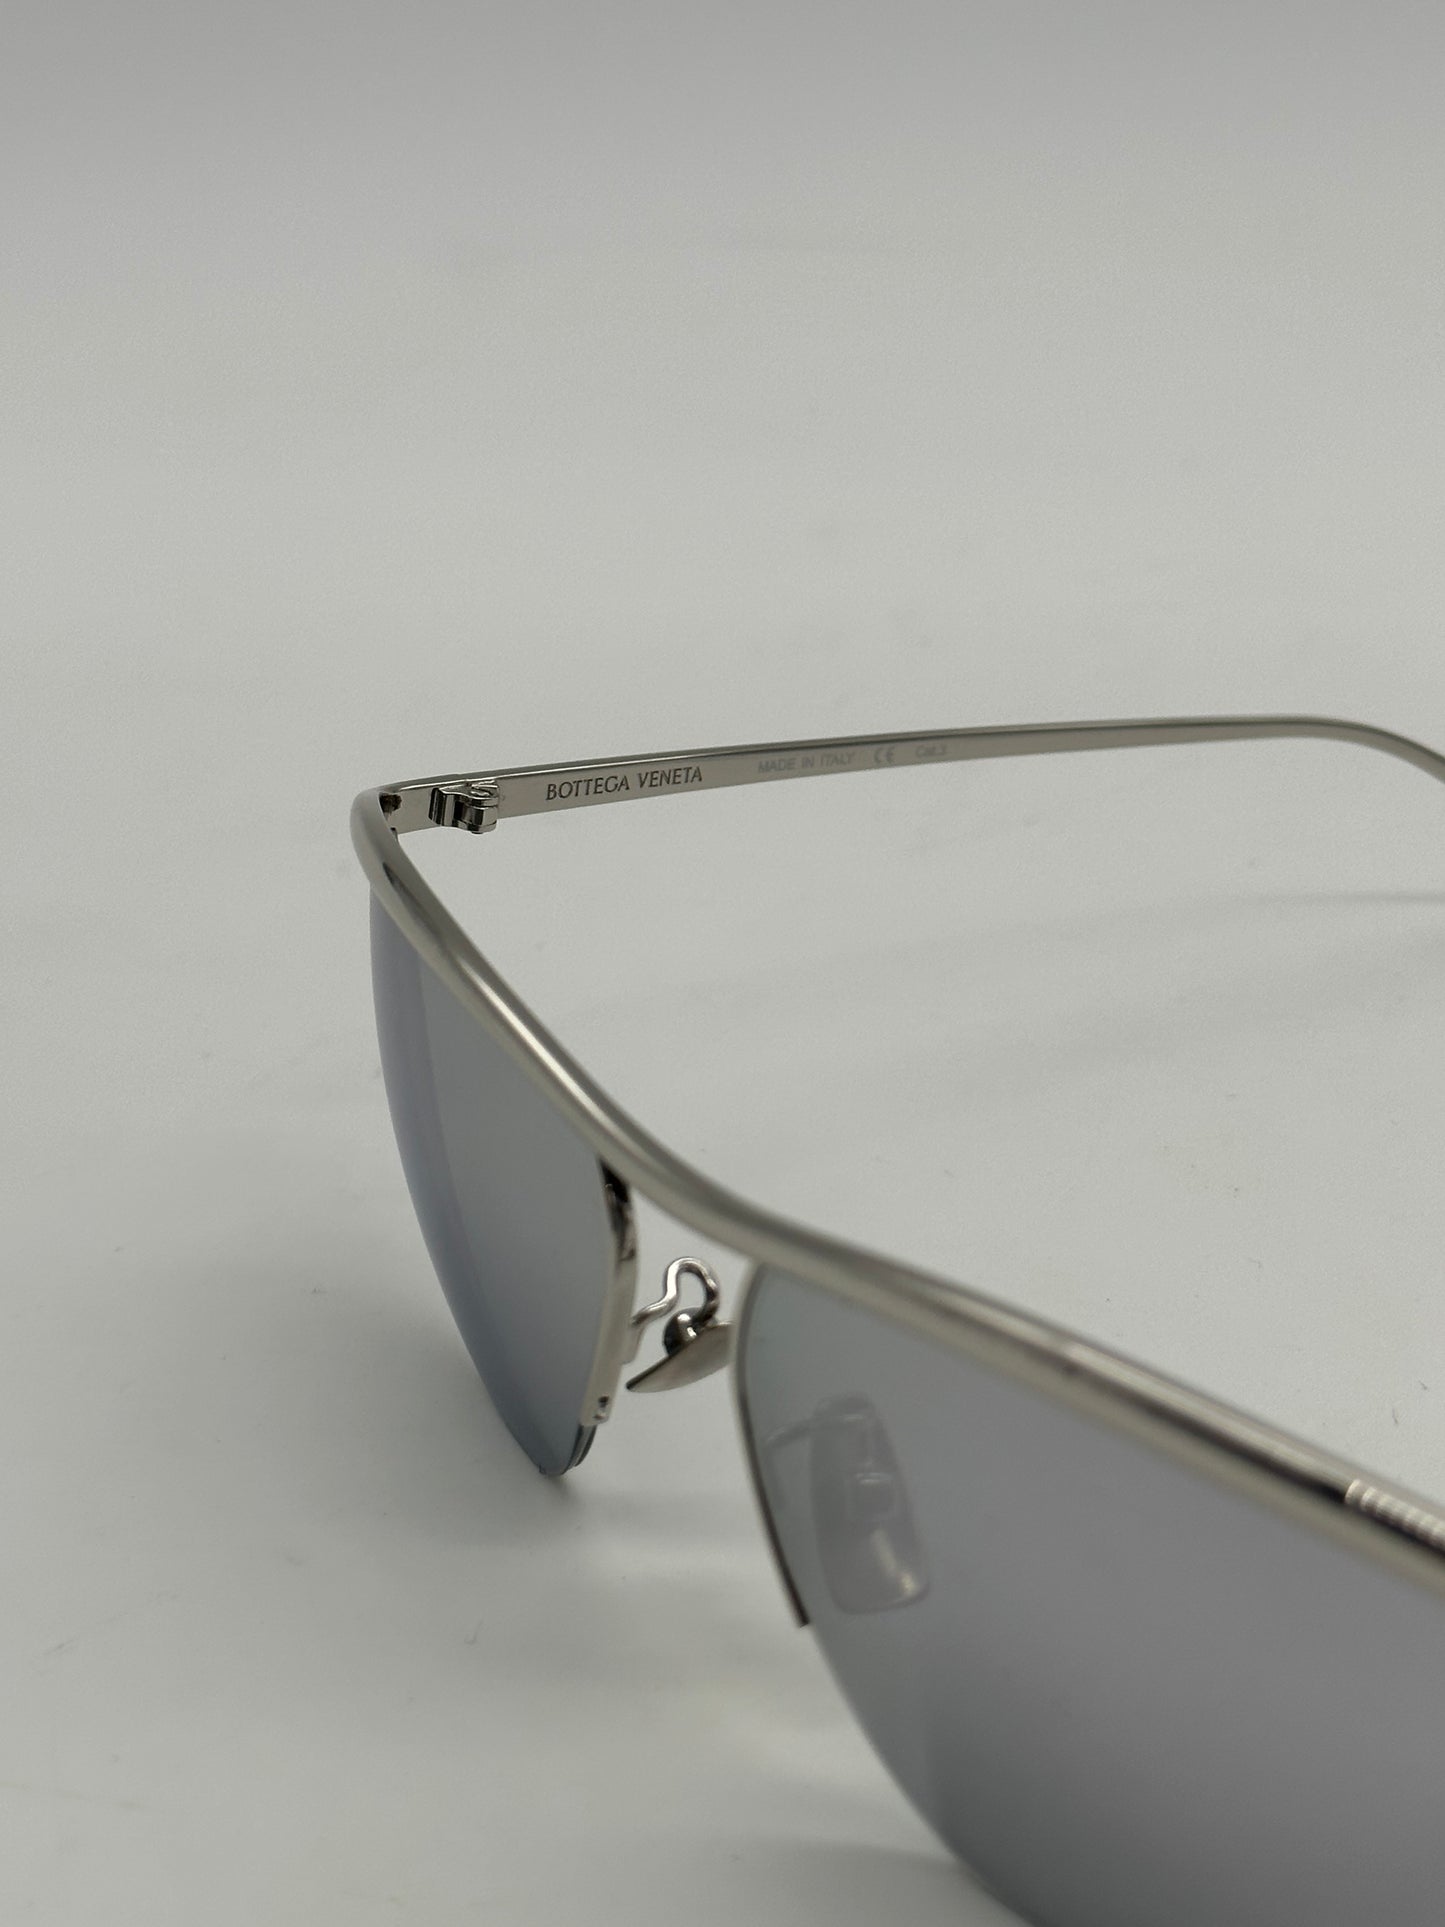 Silver Sunglasses With Logo